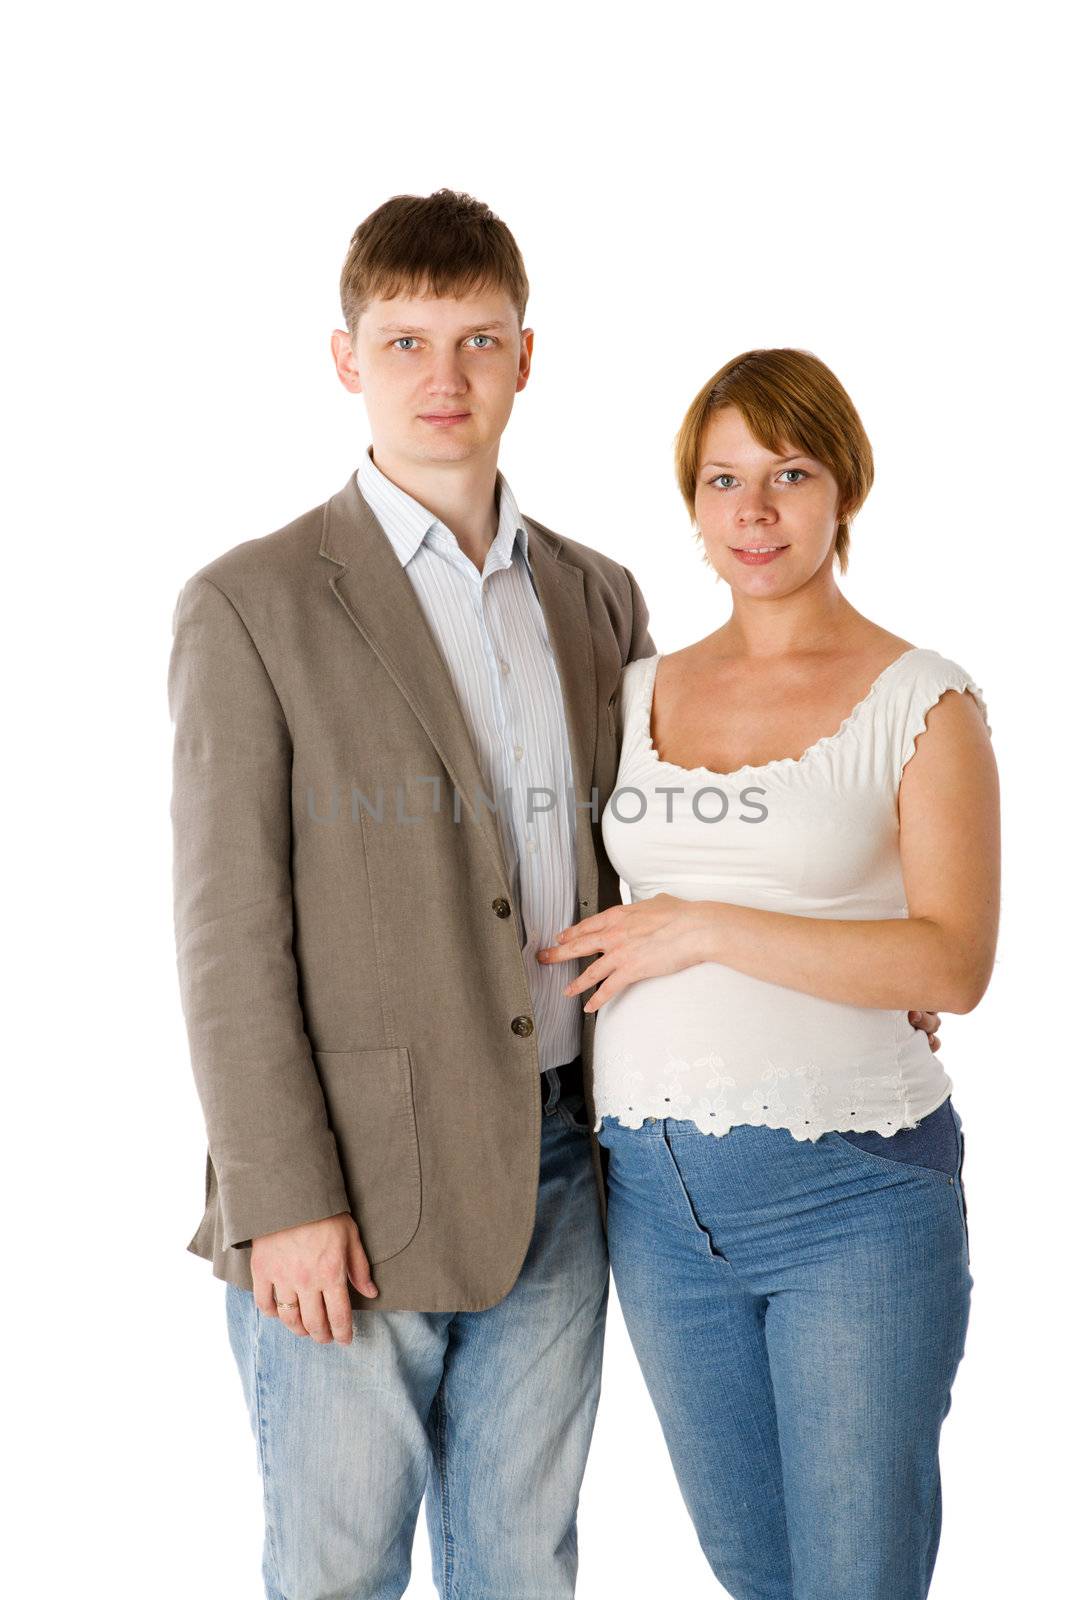 Pregnant couple posing together isolated on white